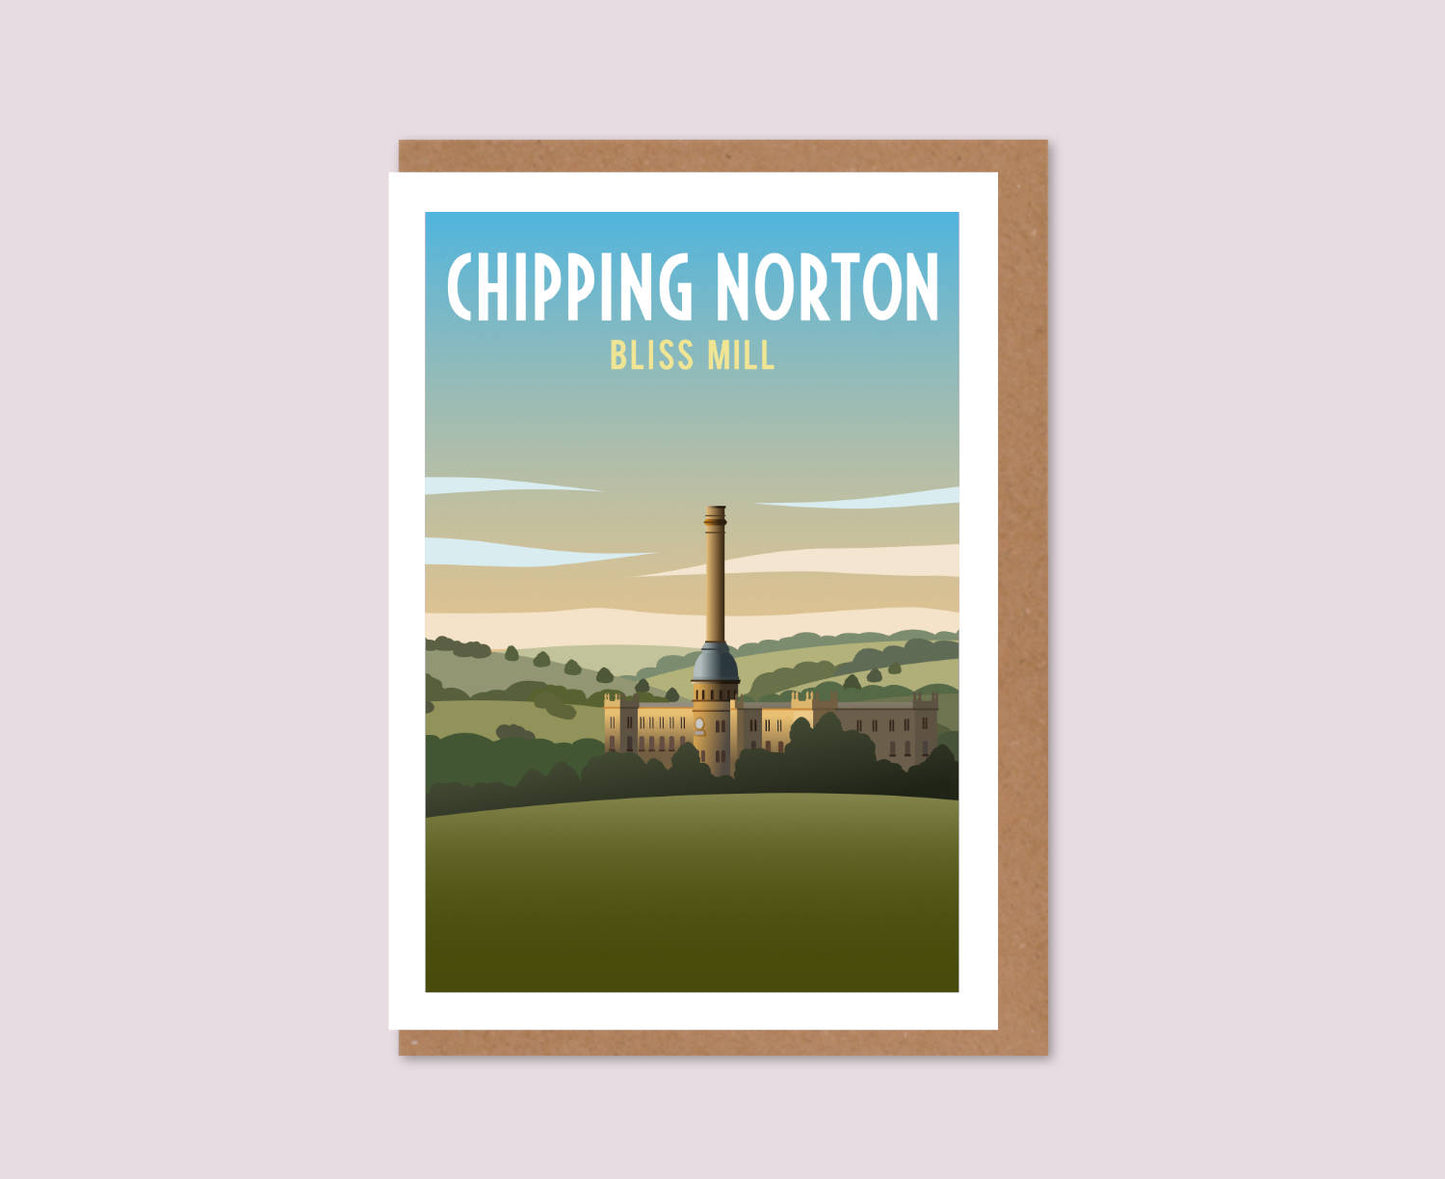 Chipping Norton Bliss Mill Greeting Card Design